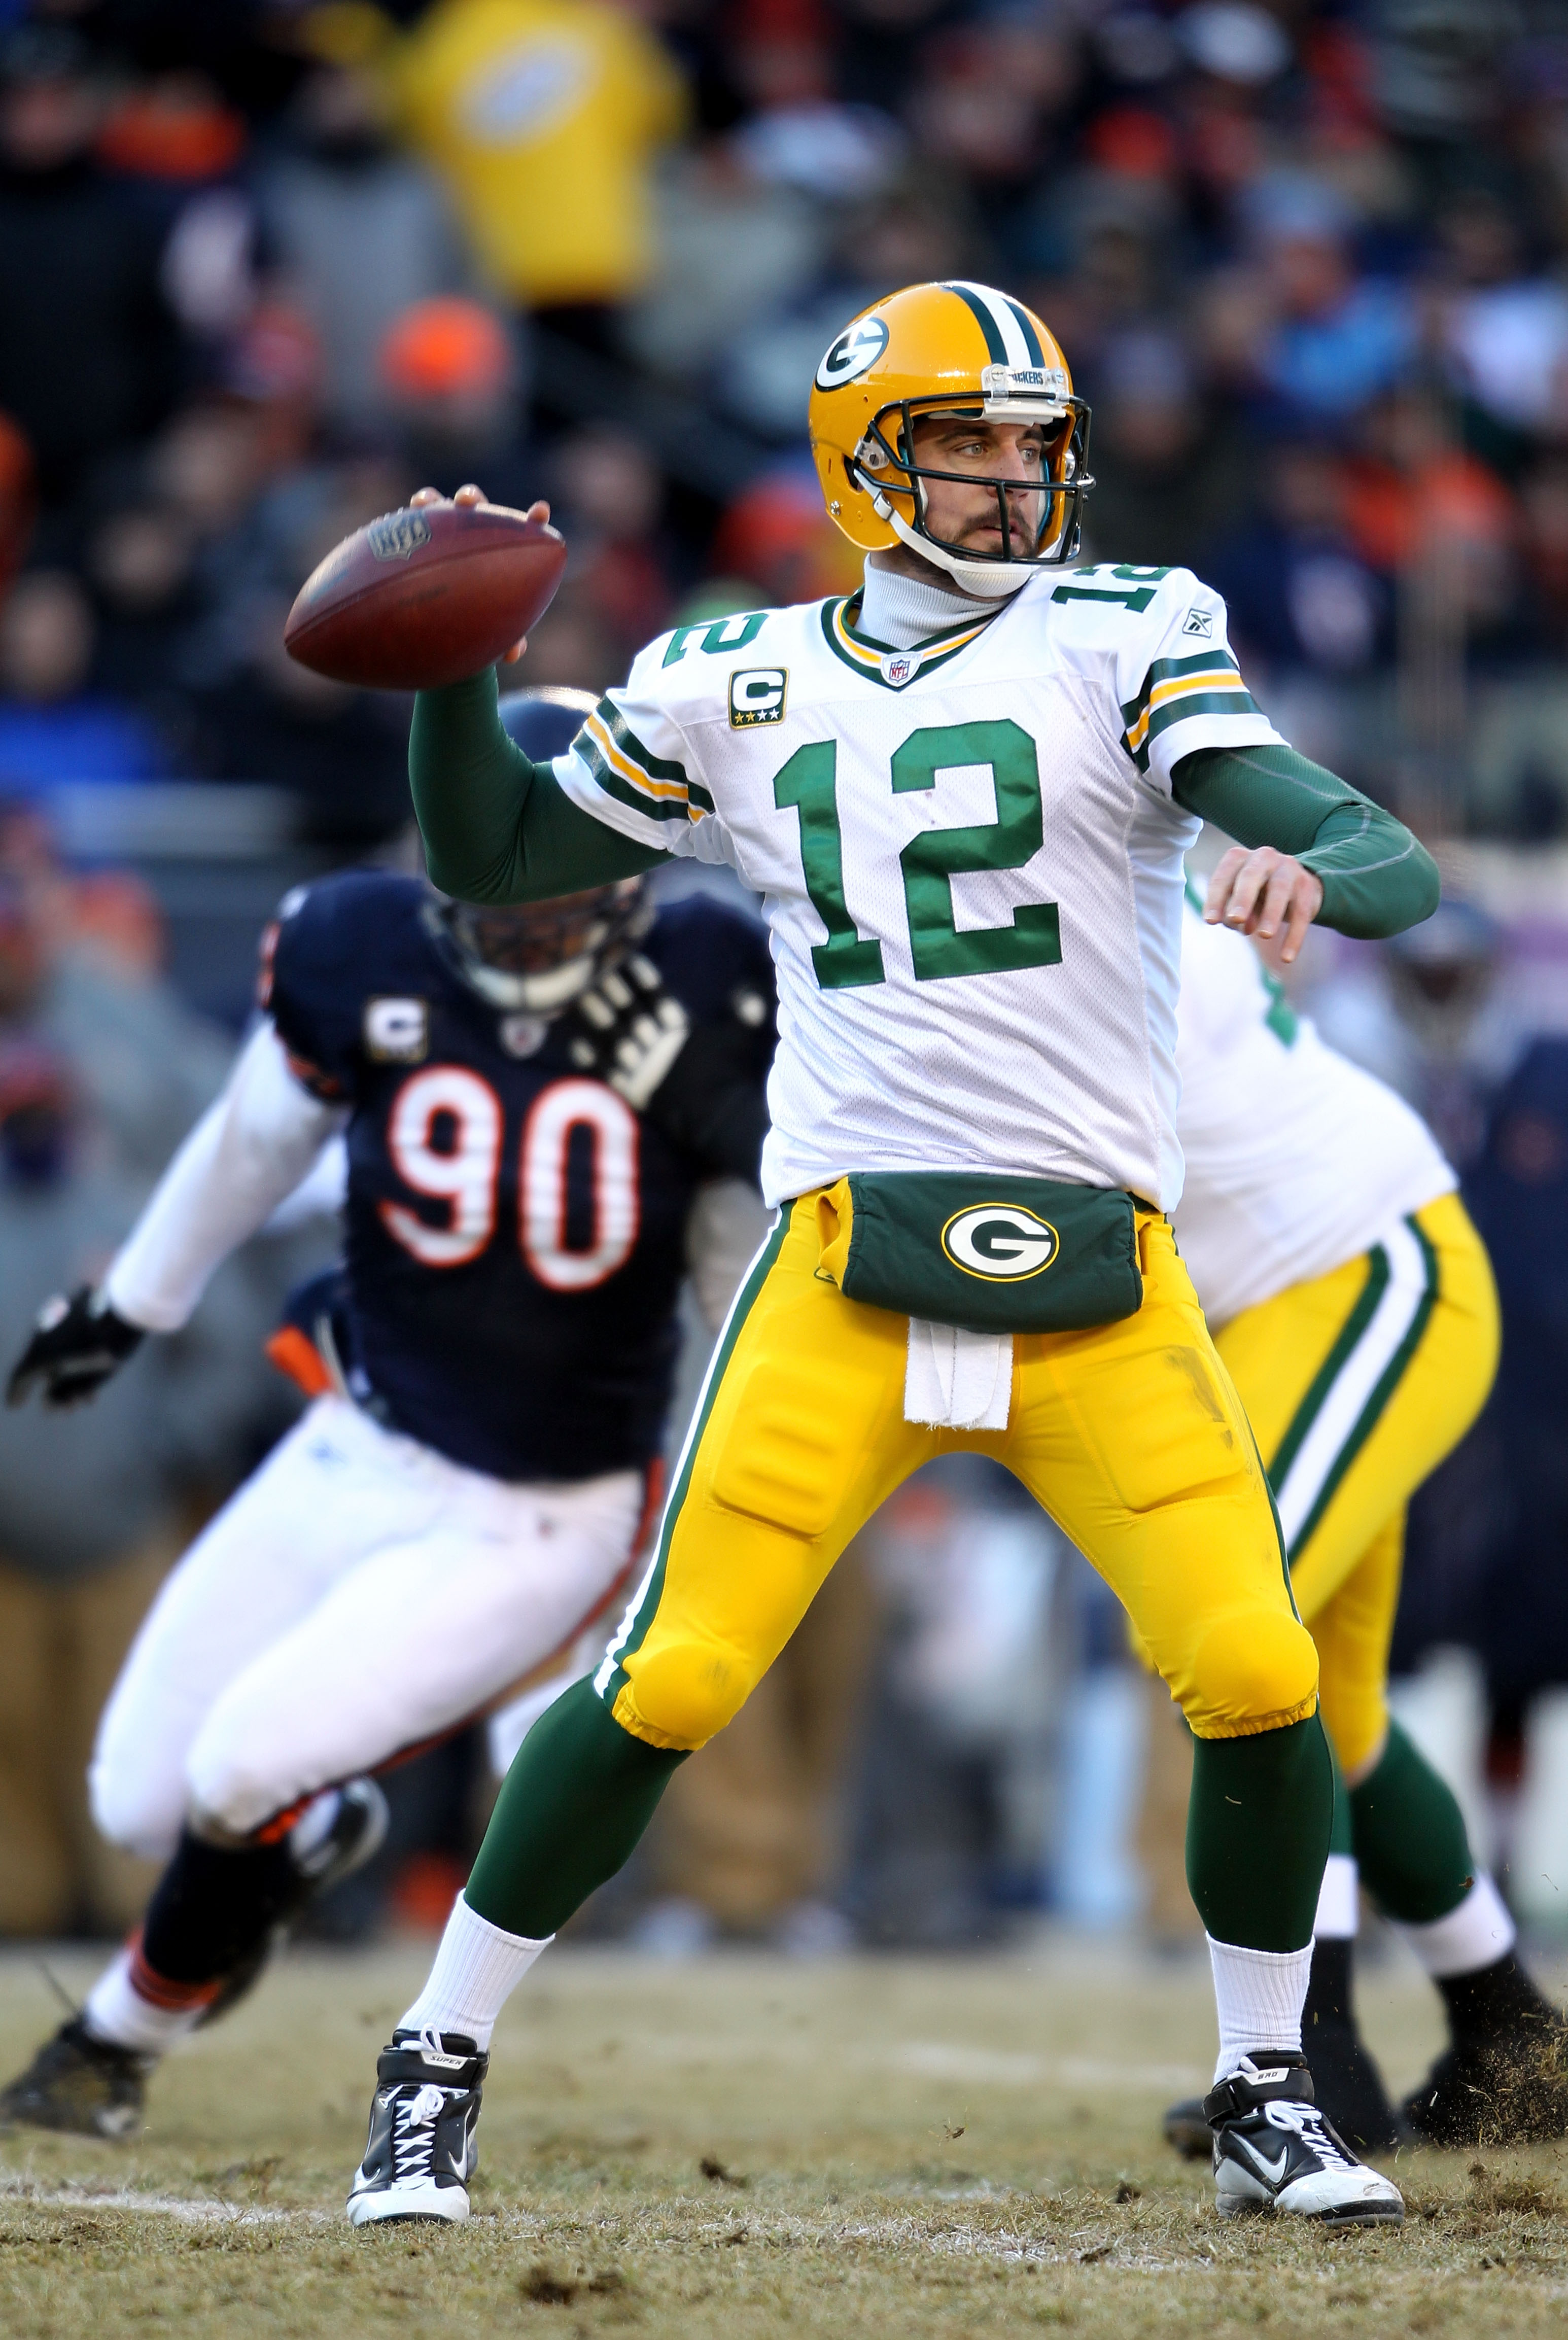 CHICAGO, IL - JANUARY 23:  Quarterback Aaron Rodgers #12 of the Green Bay Packers looks to pass against the Chicago Bears in the NFC Championship Game at Soldier Field on January 23, 2011 in Chicago, Illinois.  (Photo by Andy Lyons/Getty Images)